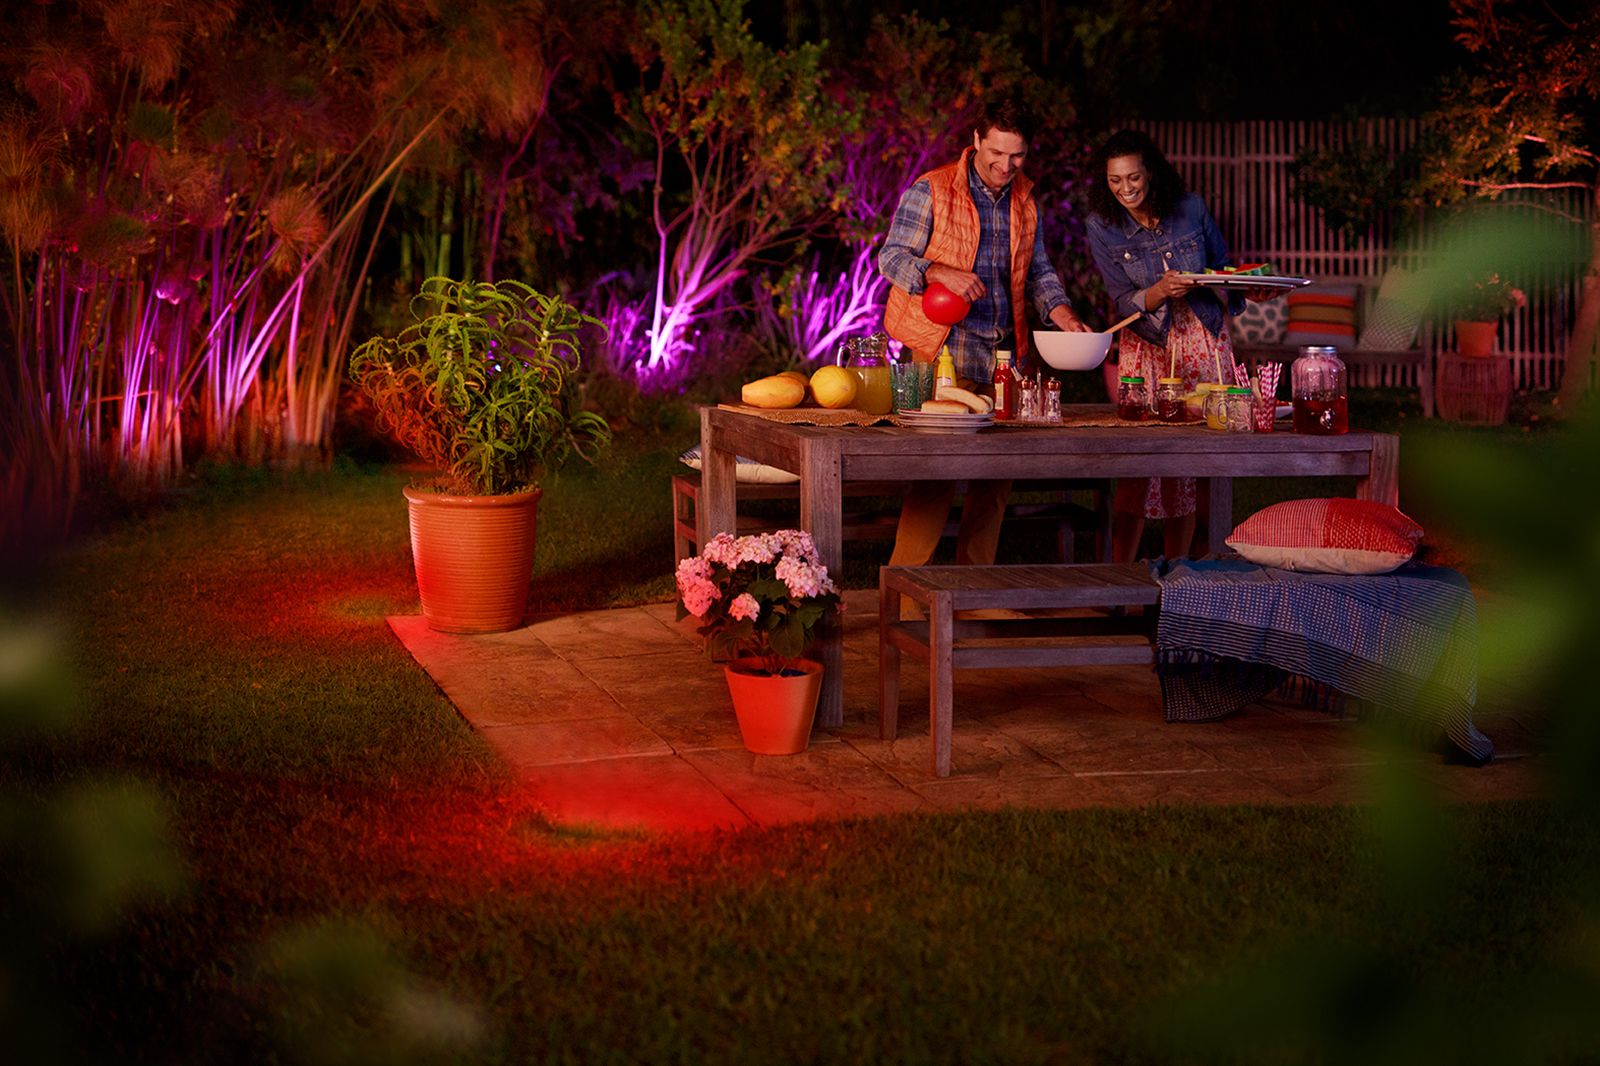 Philips Hue outdoor lighting range planned for this summer image 1